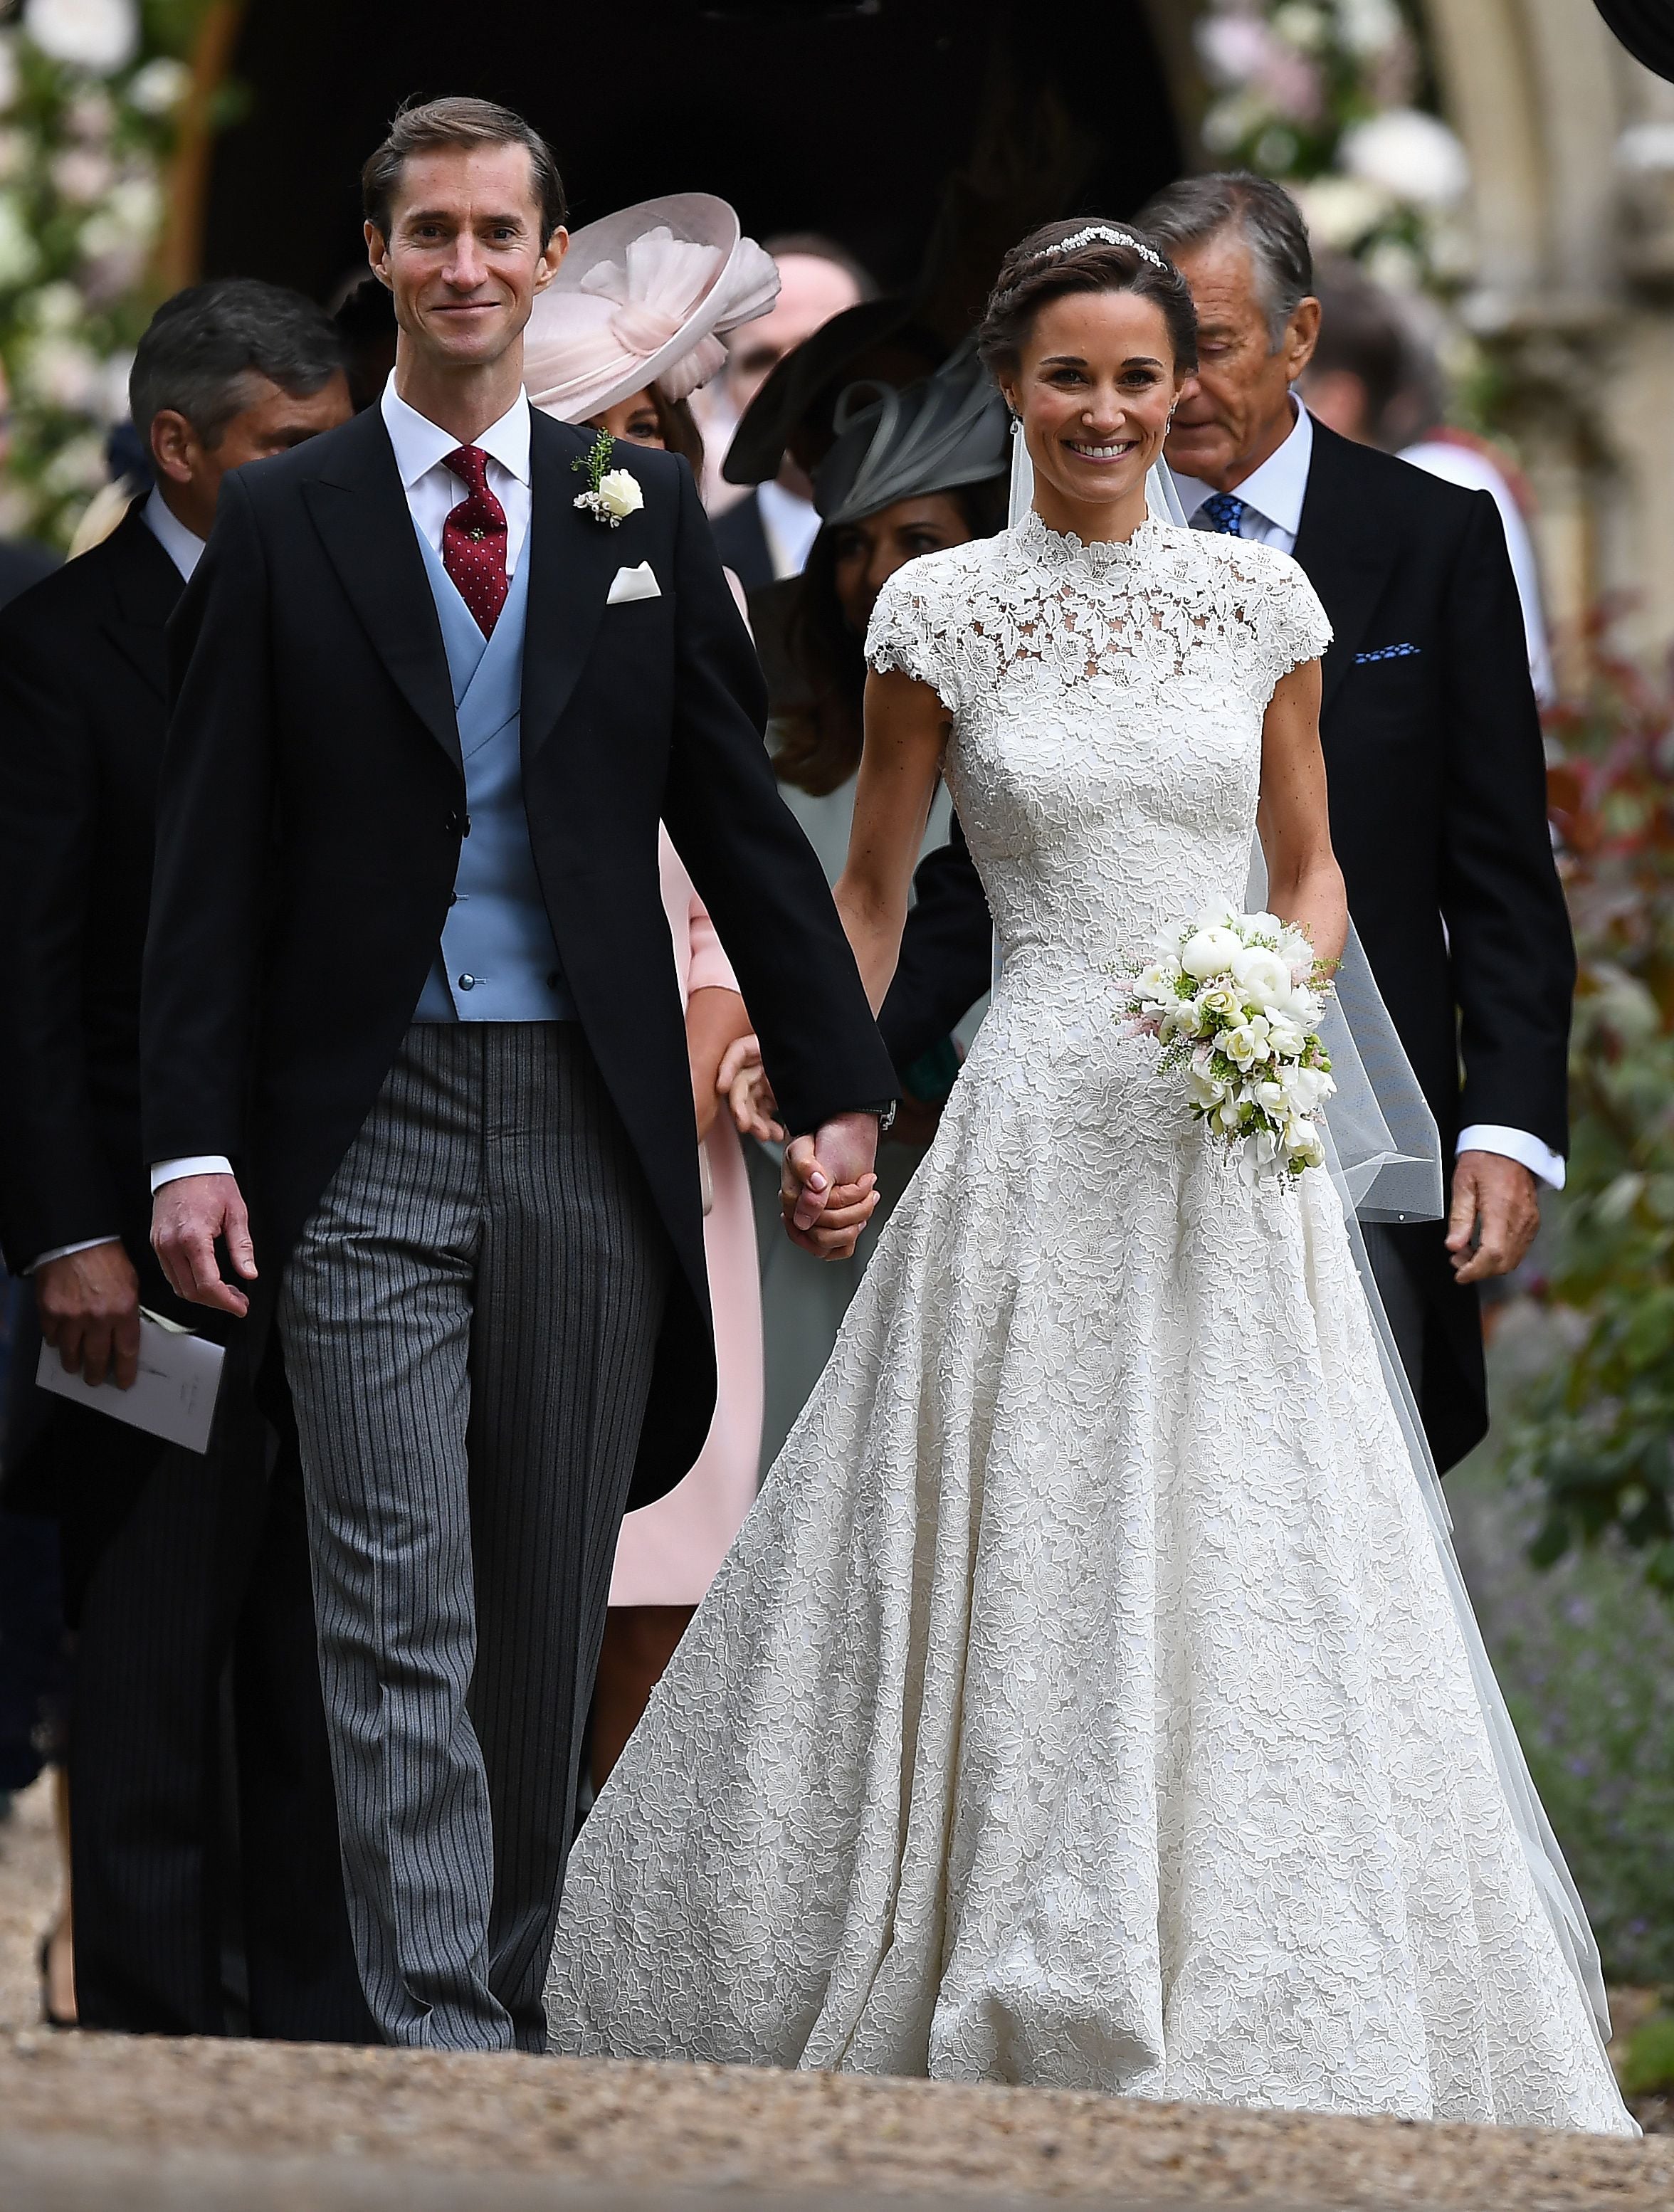 Pippa Middleton, Kate's sister, announces engagement